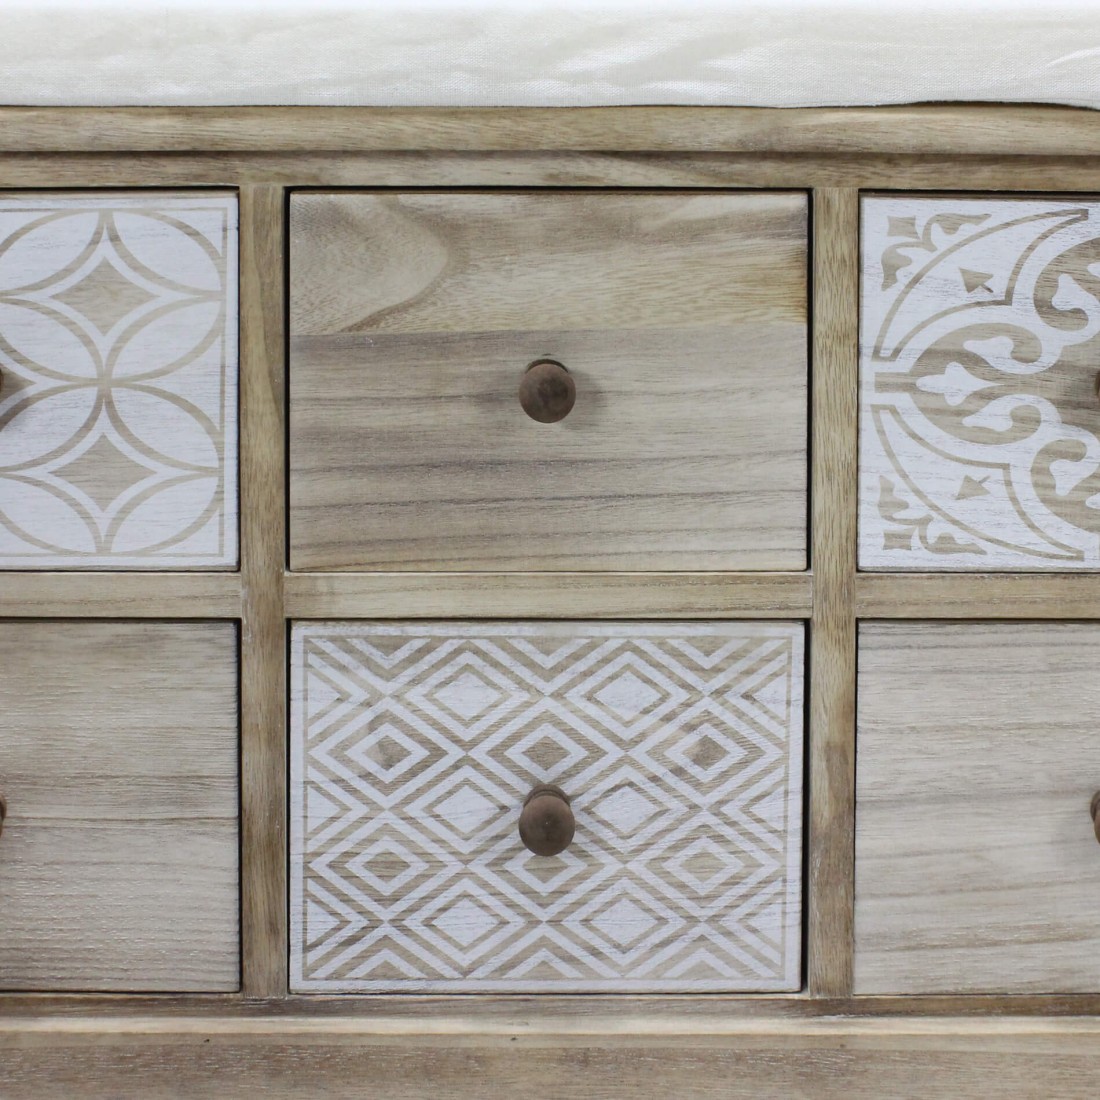 Chest with decorated drawers and upholstered seat - Mobili Rebecca